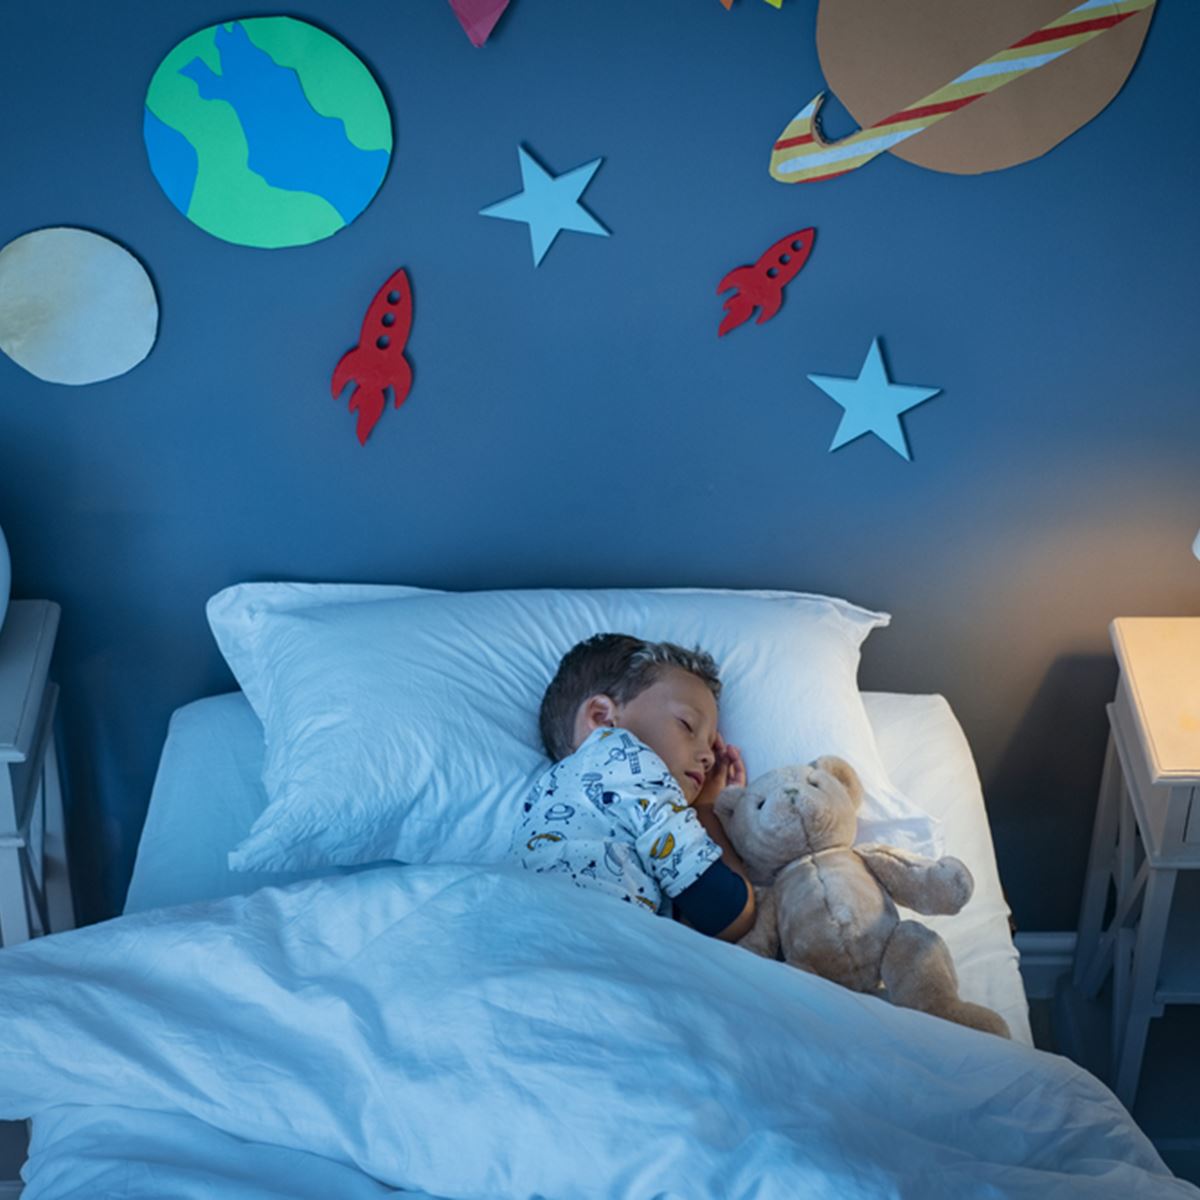 Sensory Room Ideas for Kids: Benefits & How to Build One